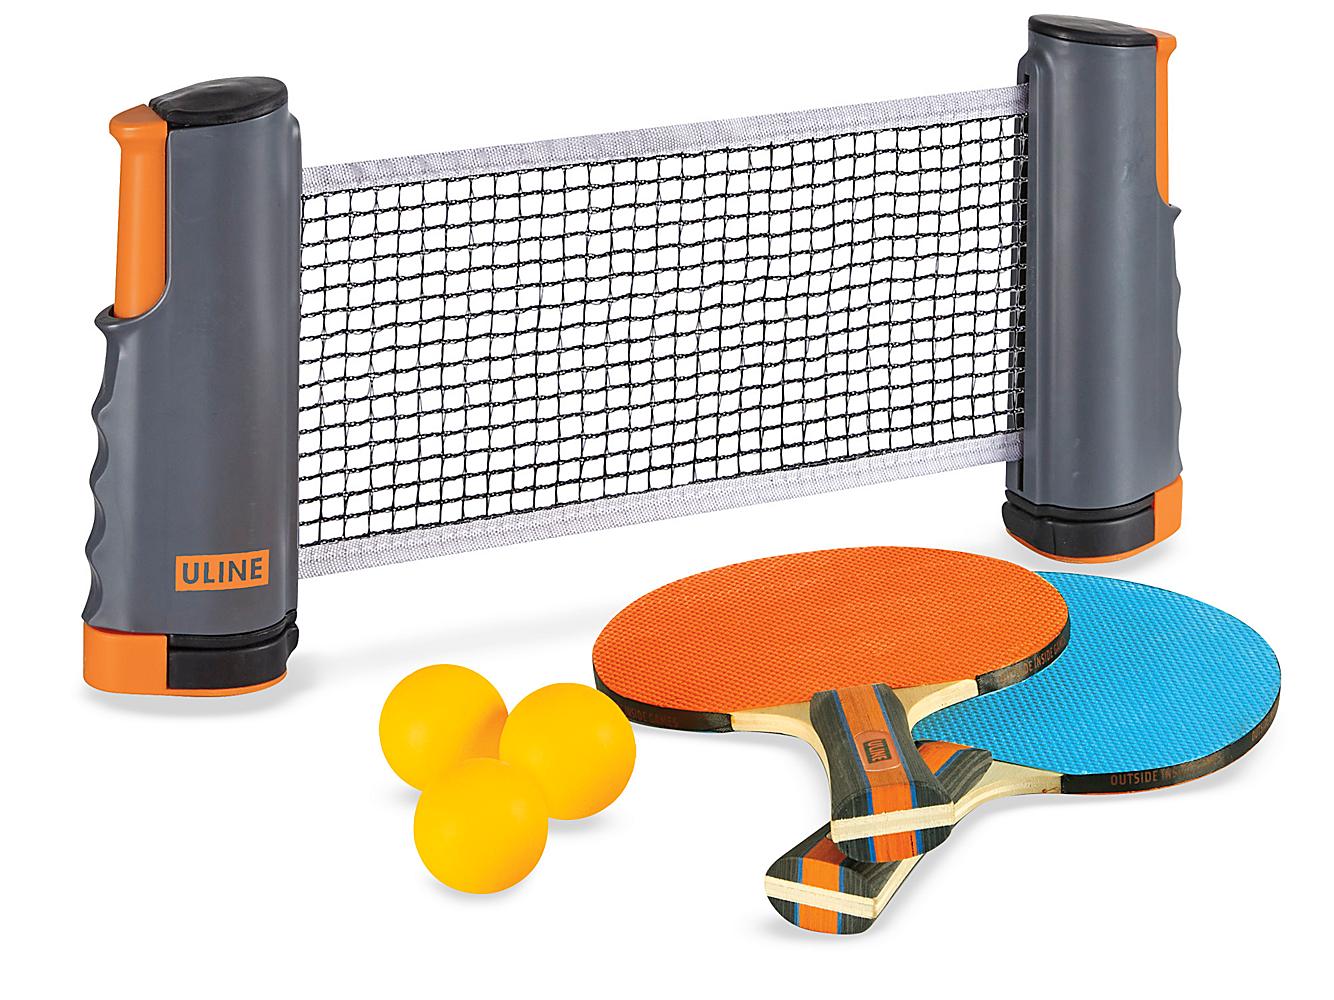 Portable Table Tennis in Stock